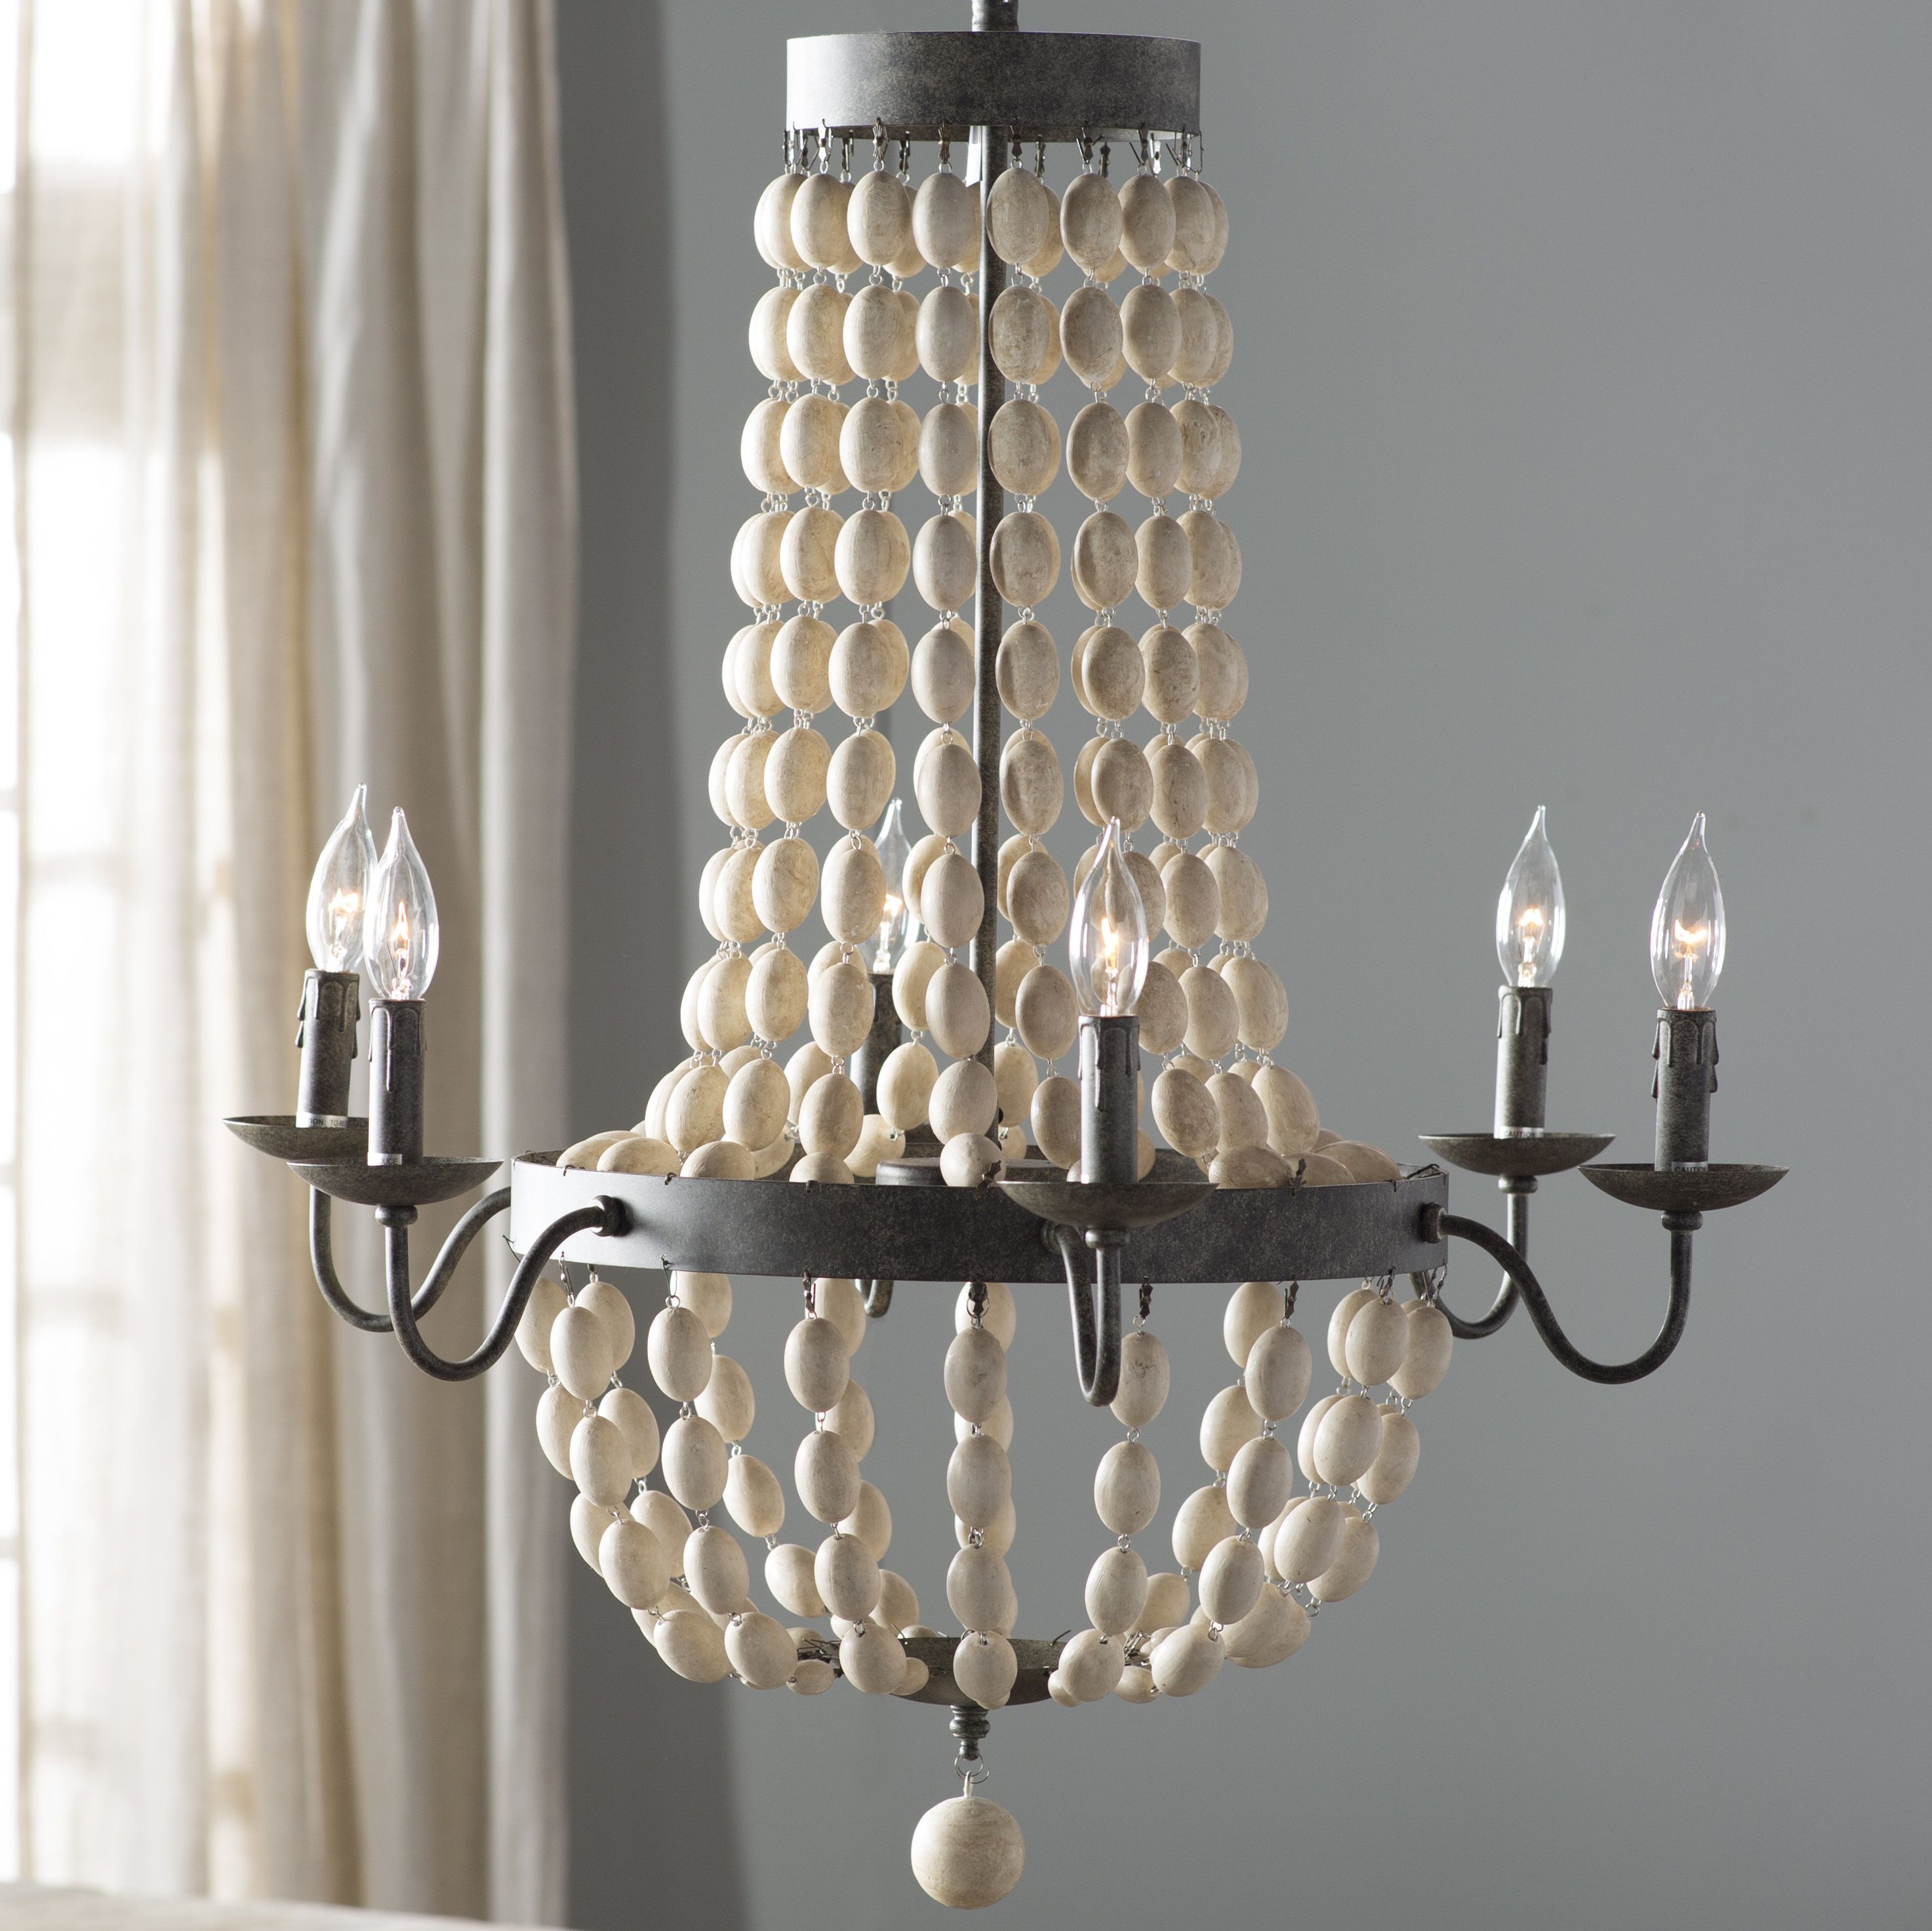 Bargas 6 Light Empire Chandelier Throughout Duron 5 Light Empire Chandeliers (Photo 6 of 30)